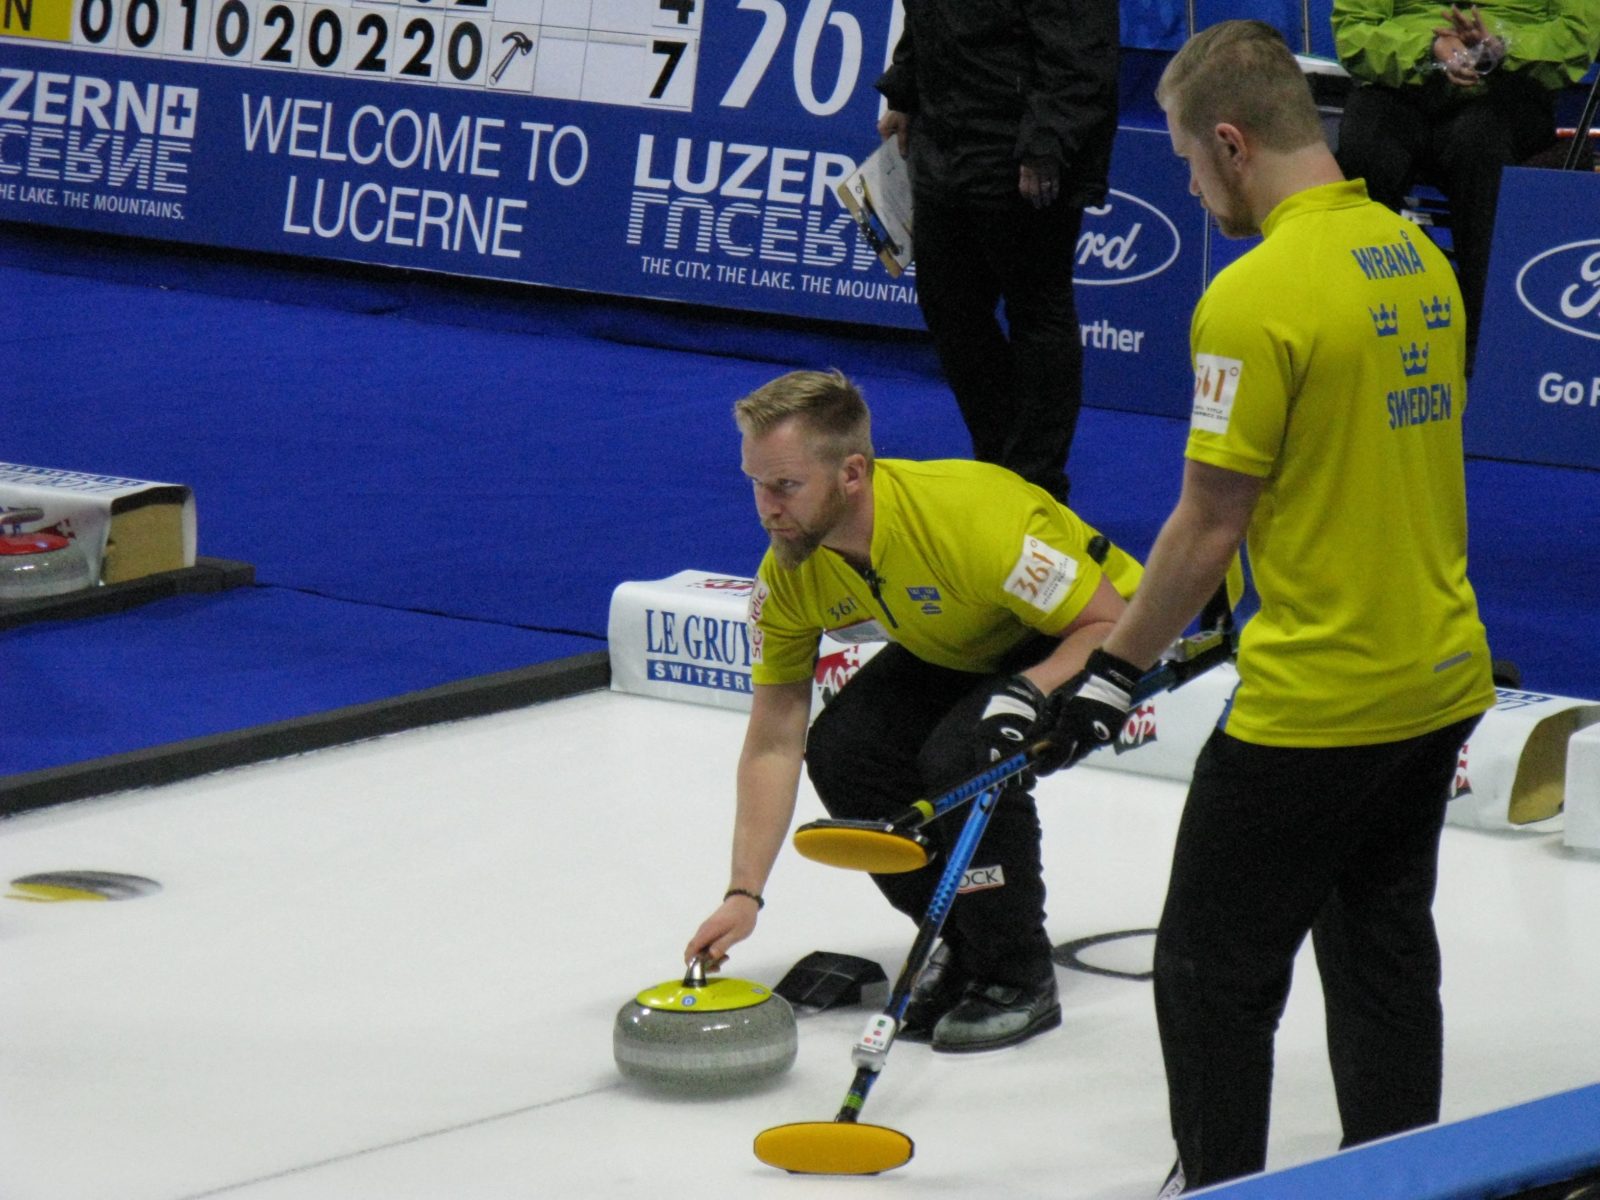 Swedish skip Niklas Edin prepares to deliver a curling stone during a game at the 2018 World Men's Curling Championship in Las Vegas on Monday, April 2, 2018.